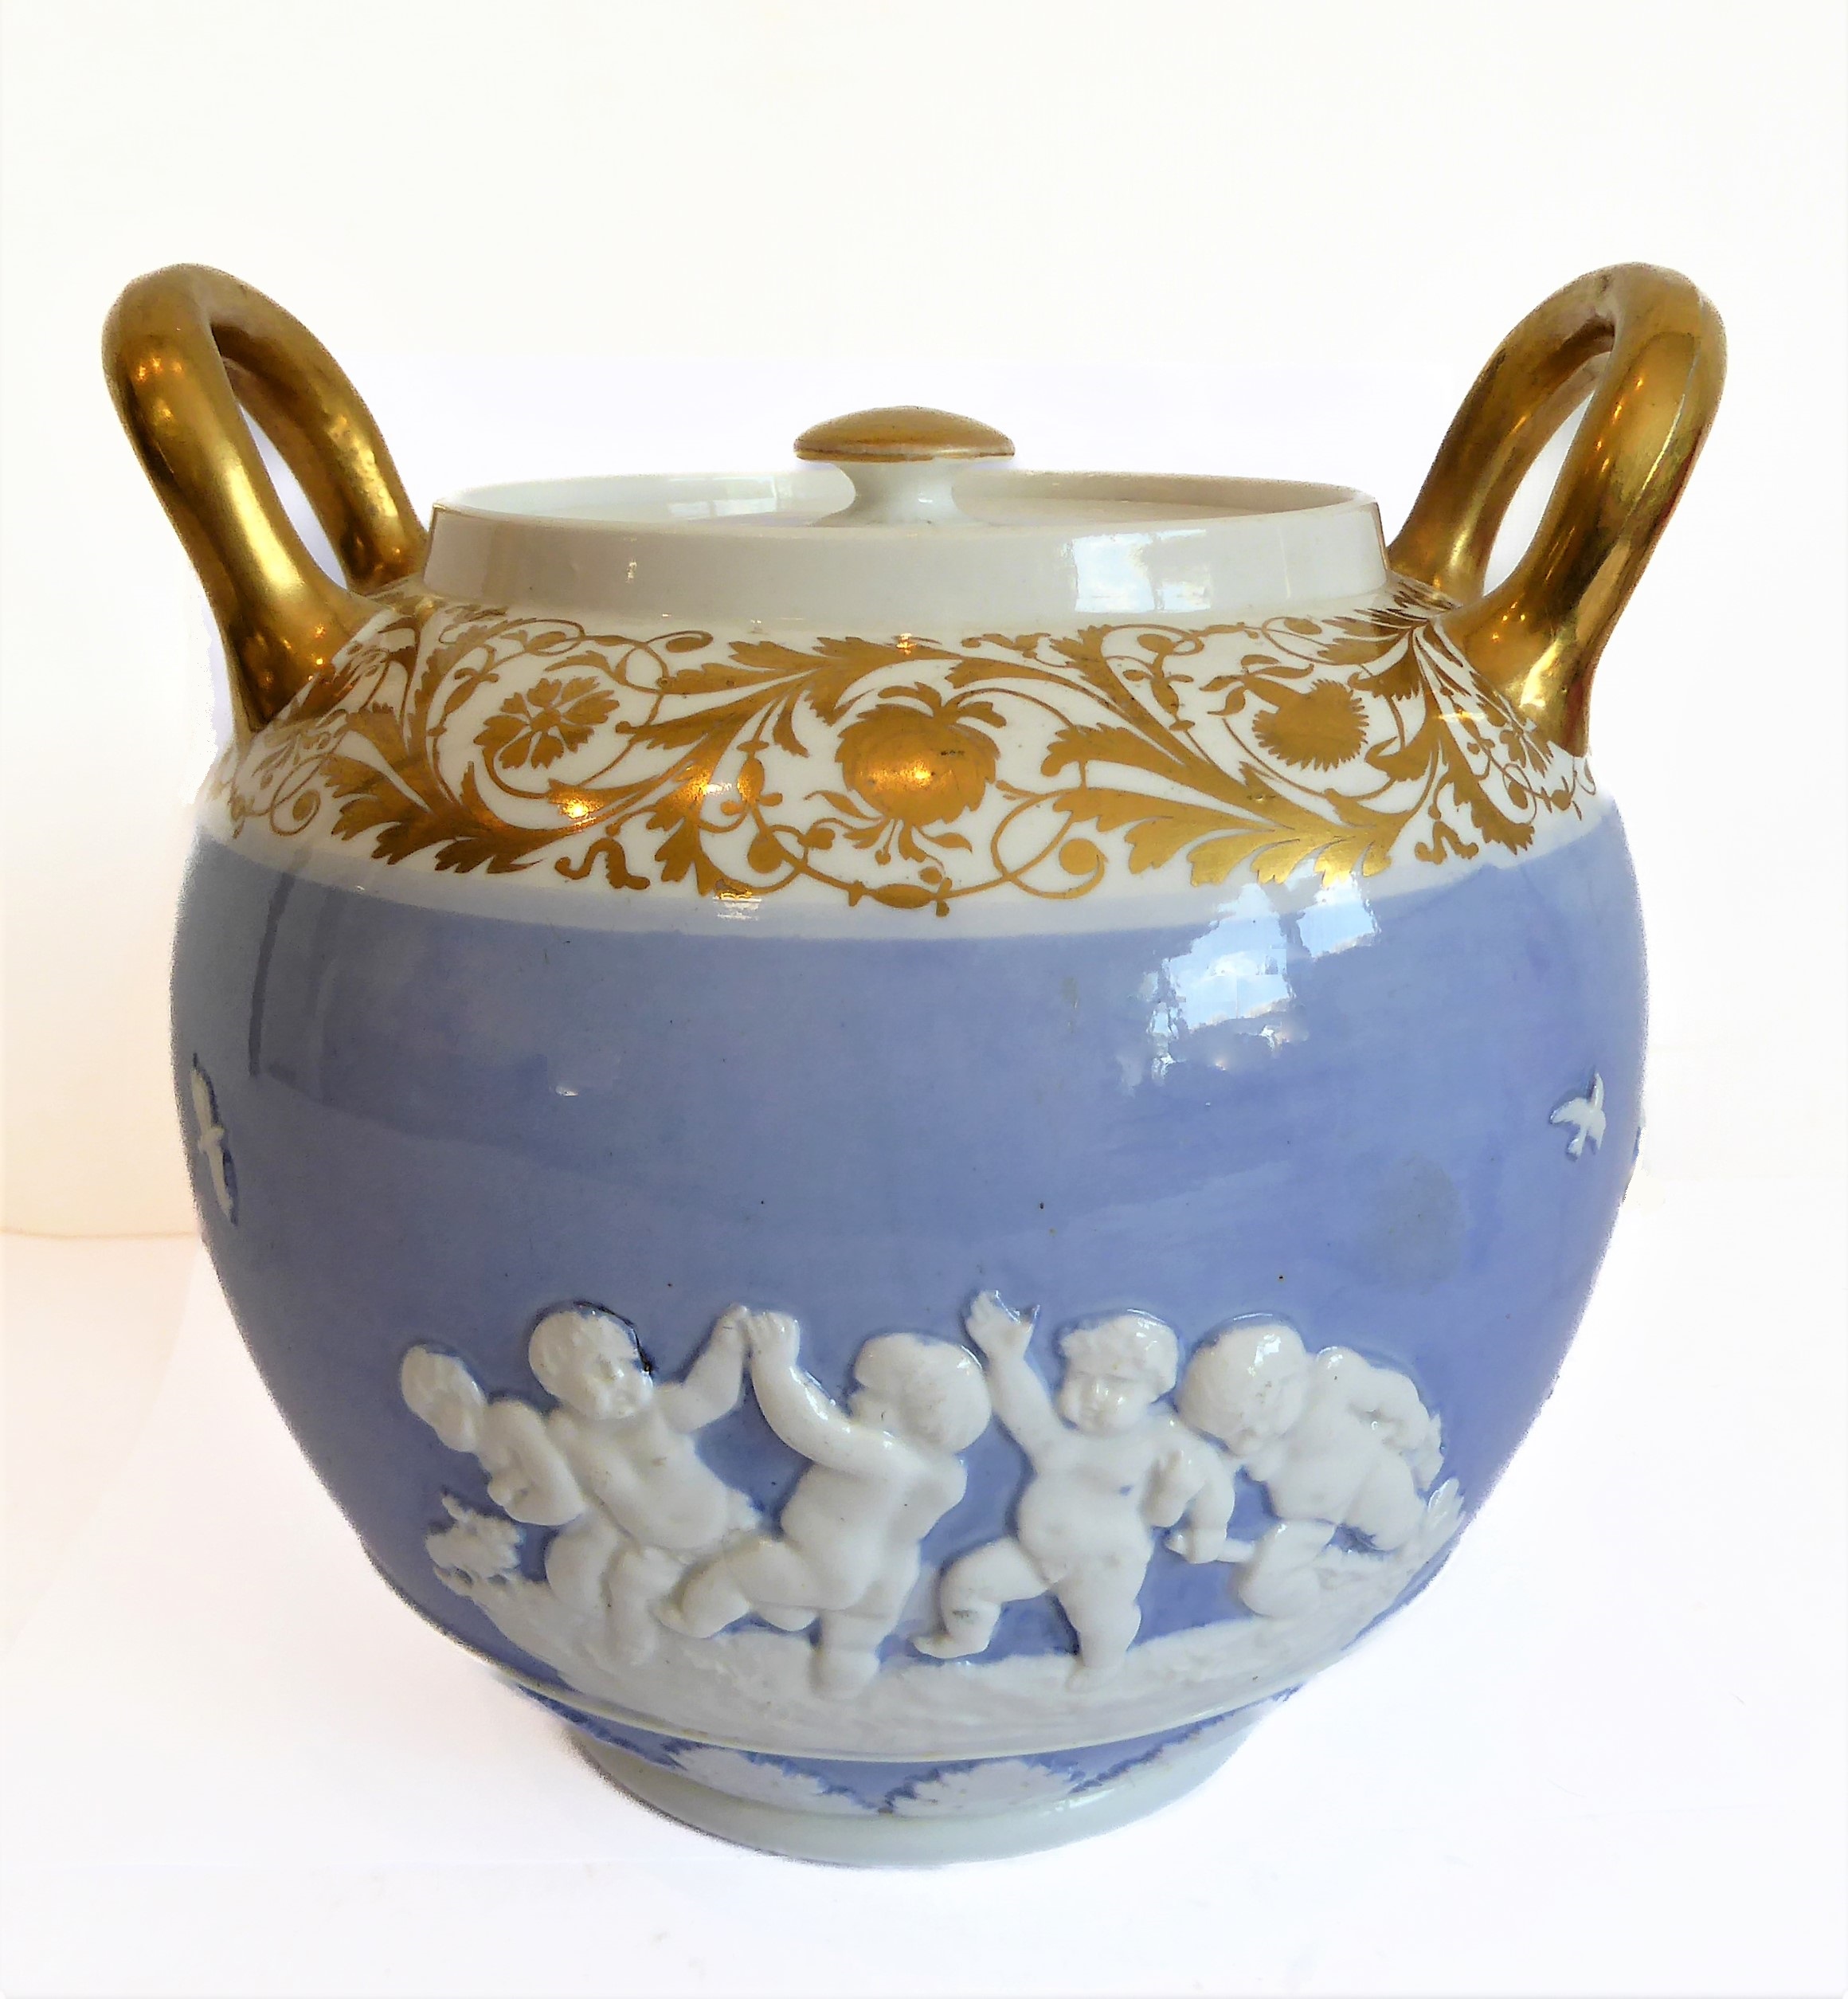 An early 19th century Spode two-handled ovoid pot and cover: gilded handles and a band of further